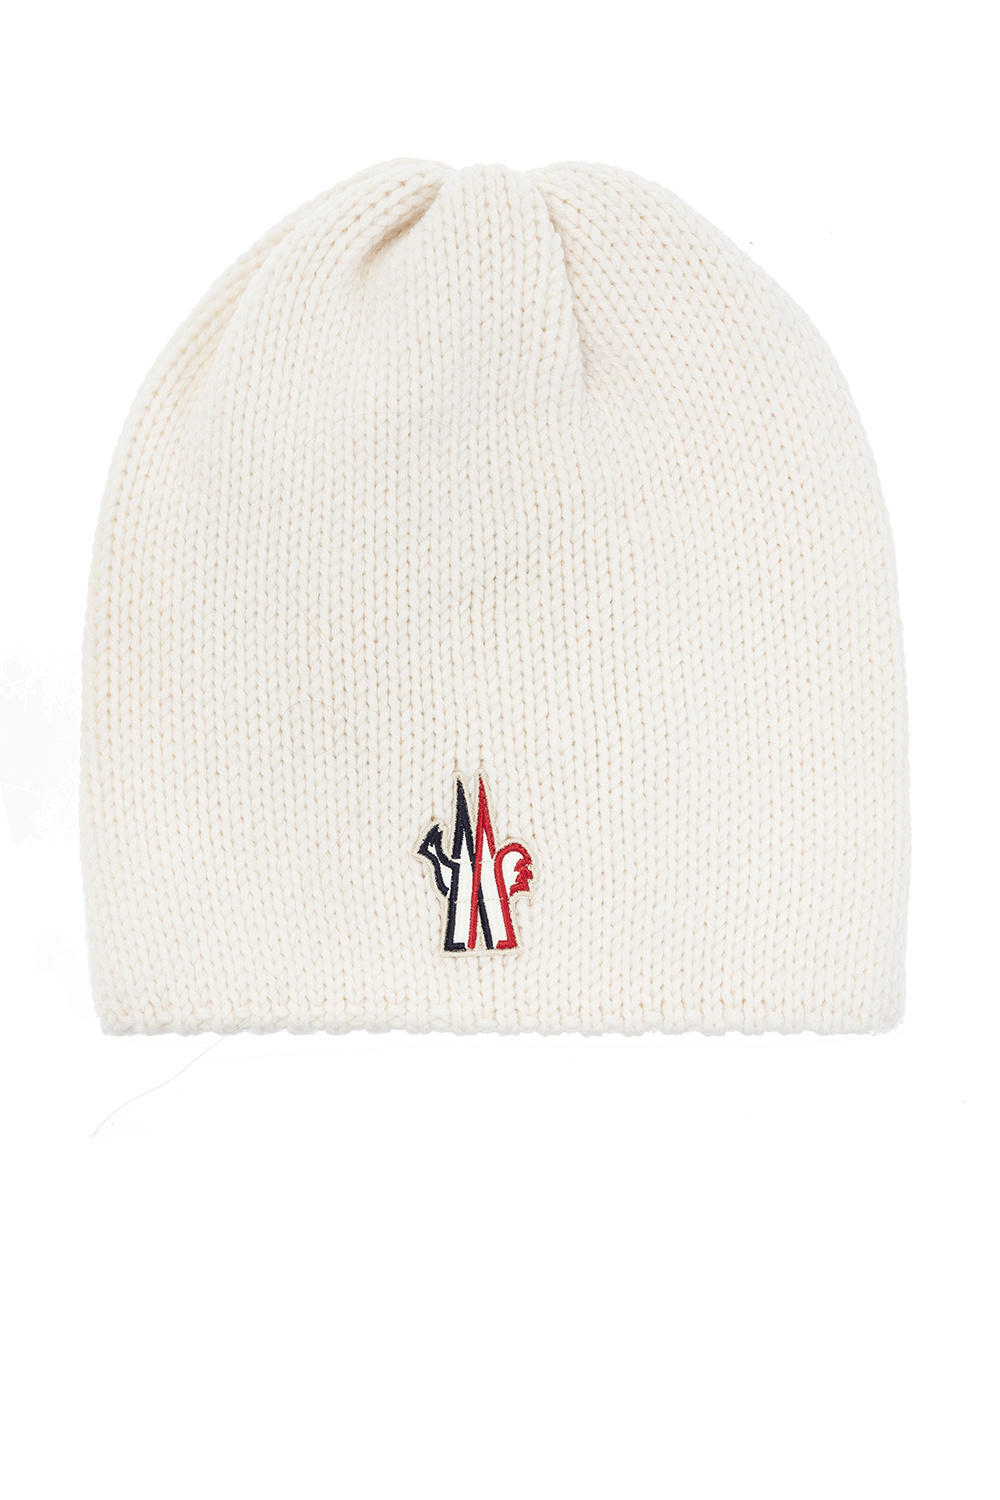 Moncler Grenoble Stussy Basic Structured Low Pro Cap